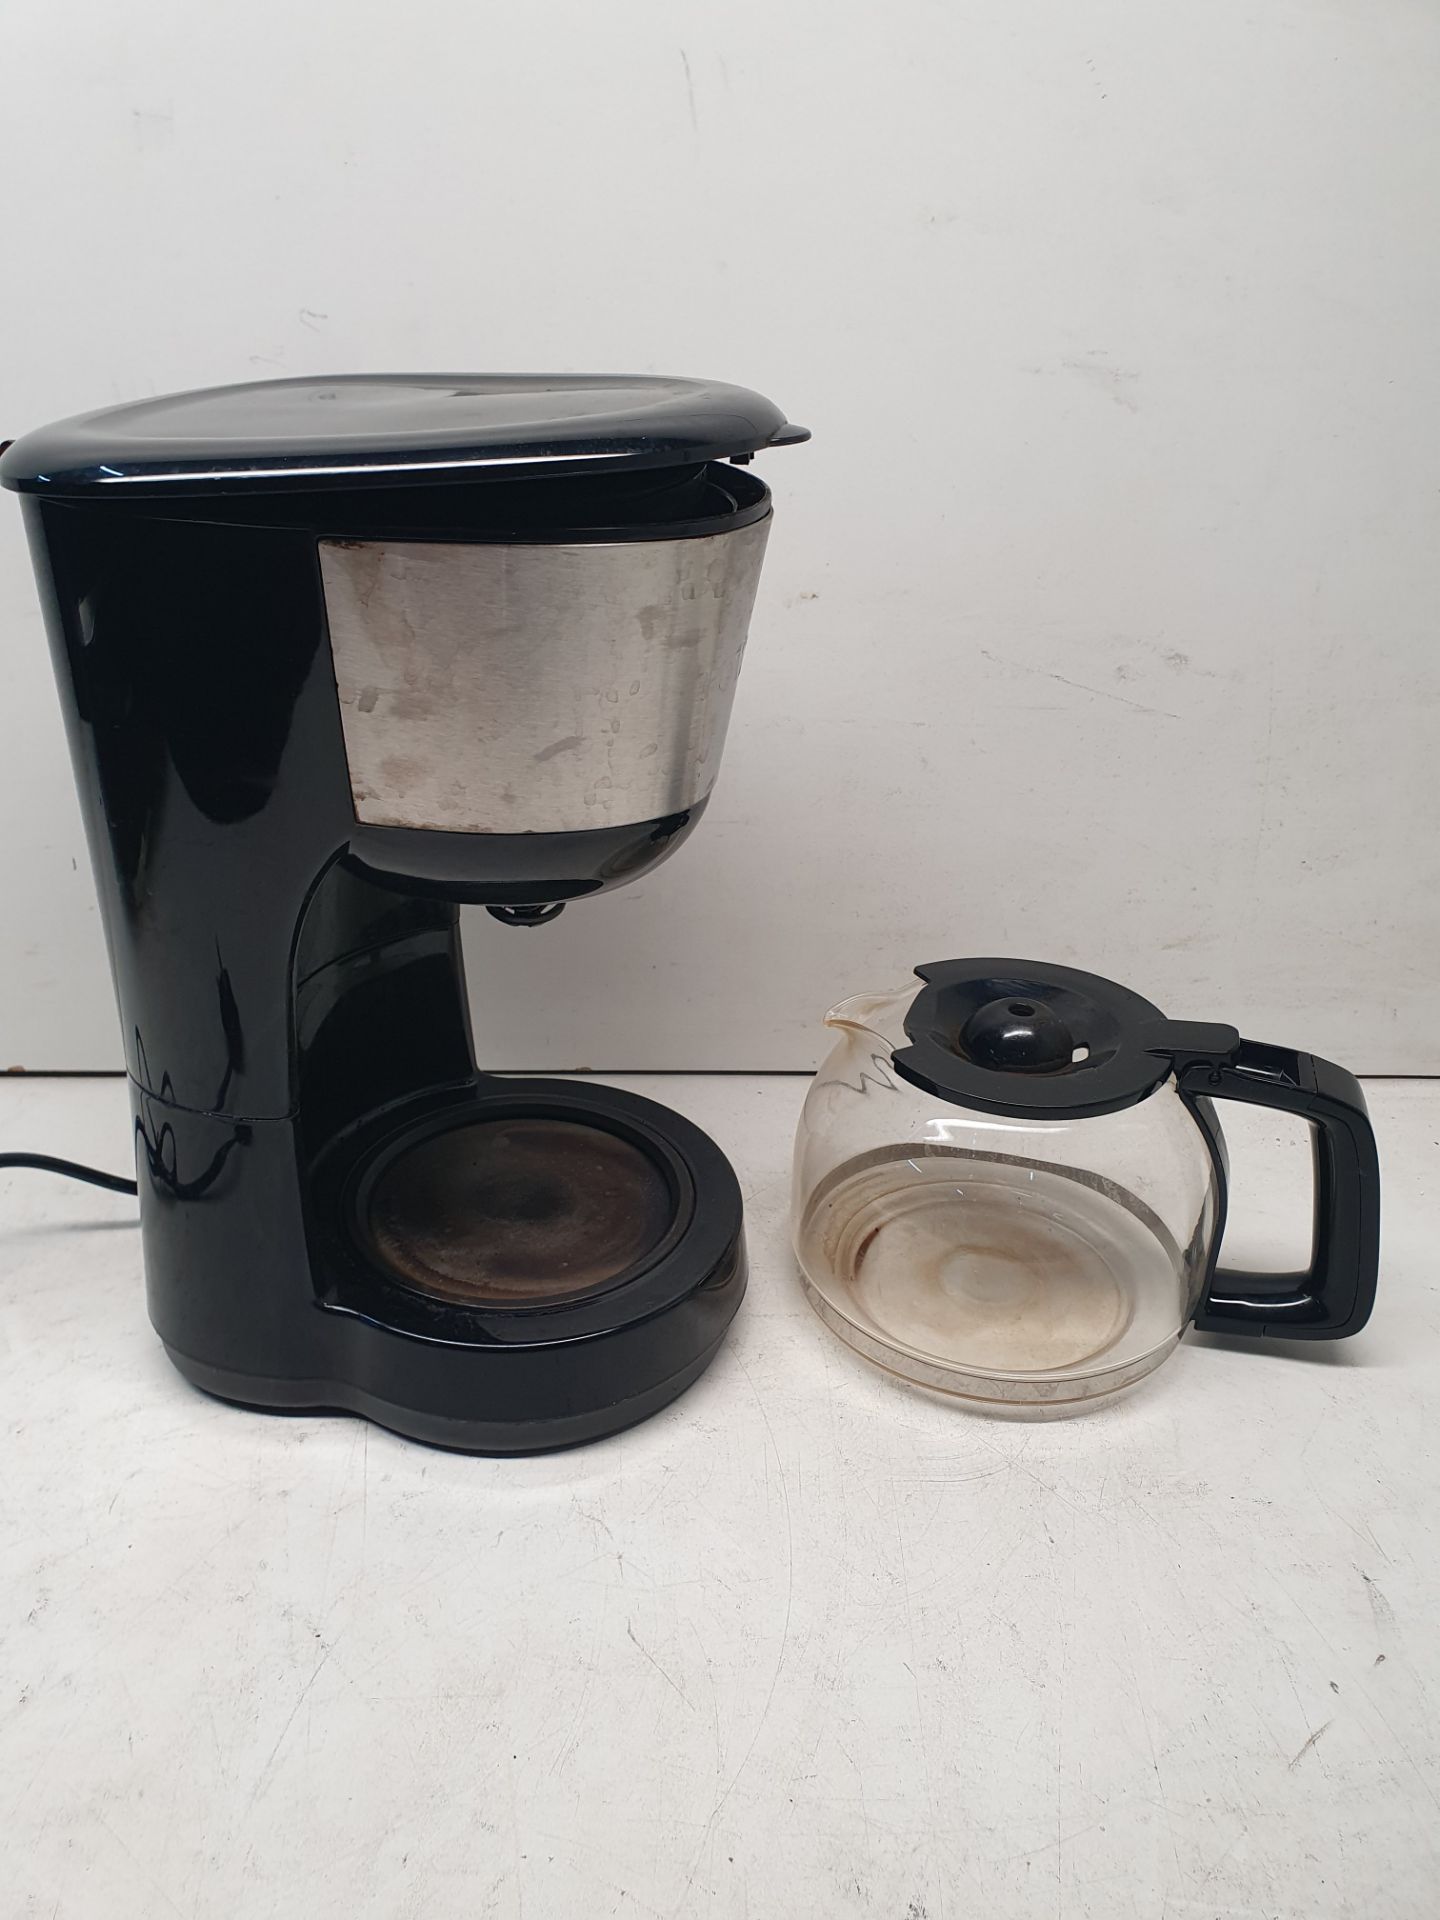 Tower T13001 10 Cup Coffee Maker with Keep Warm Function - Image 6 of 6